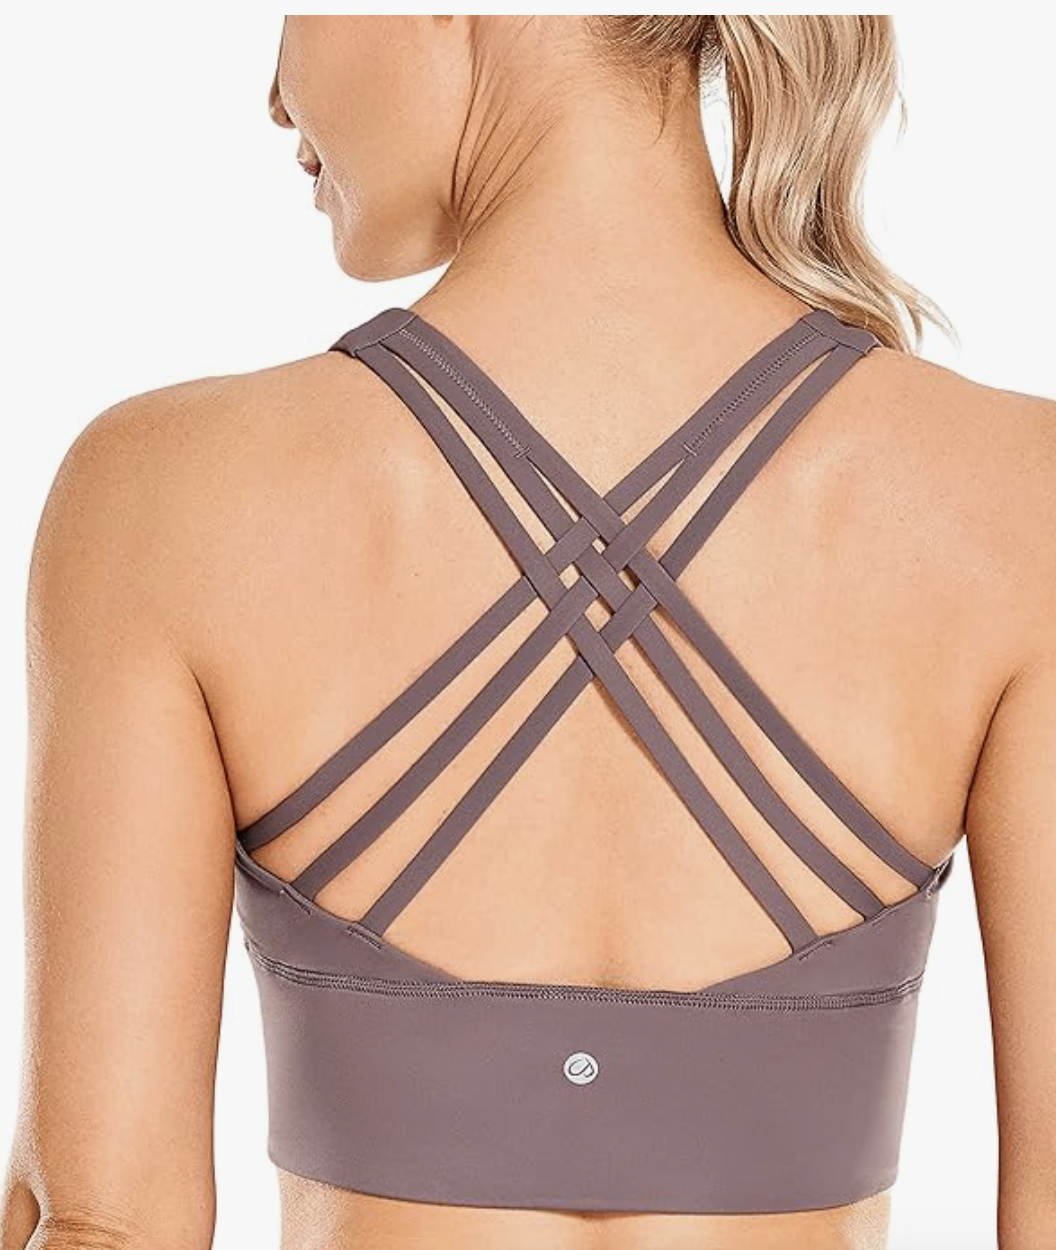 a product picture of a sports bra